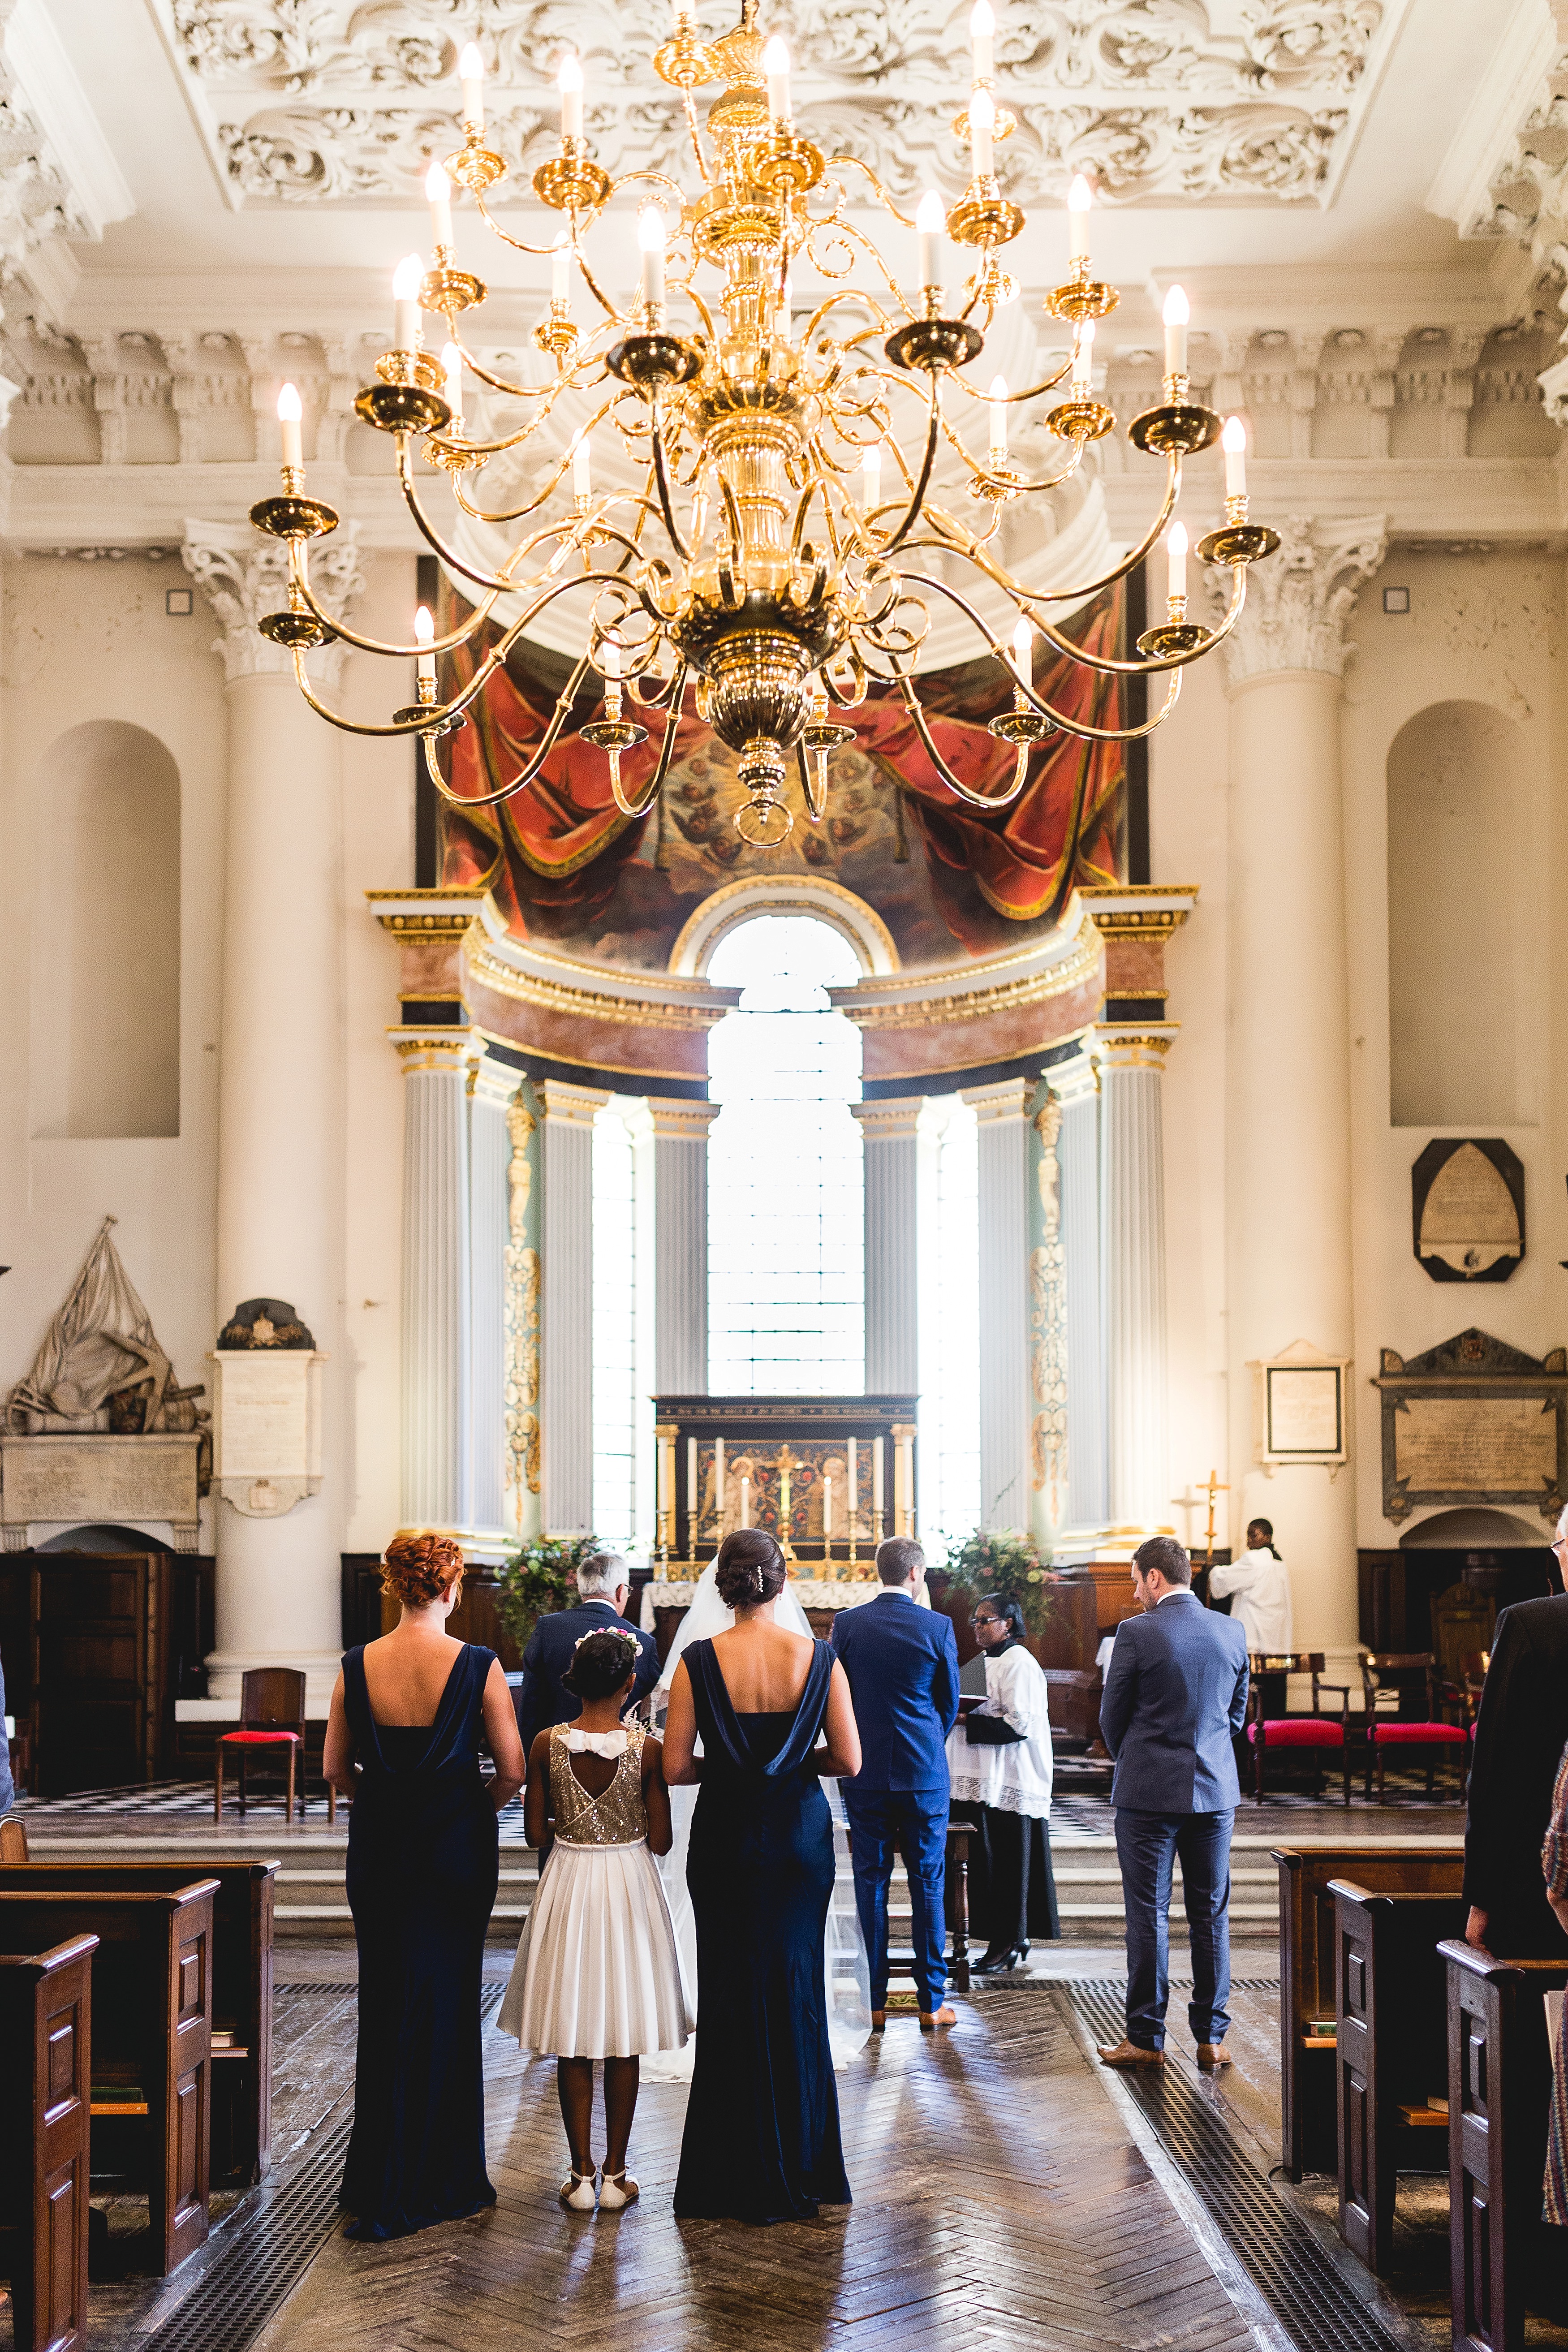 St Paul's church in Deptford wedding ceremony photos